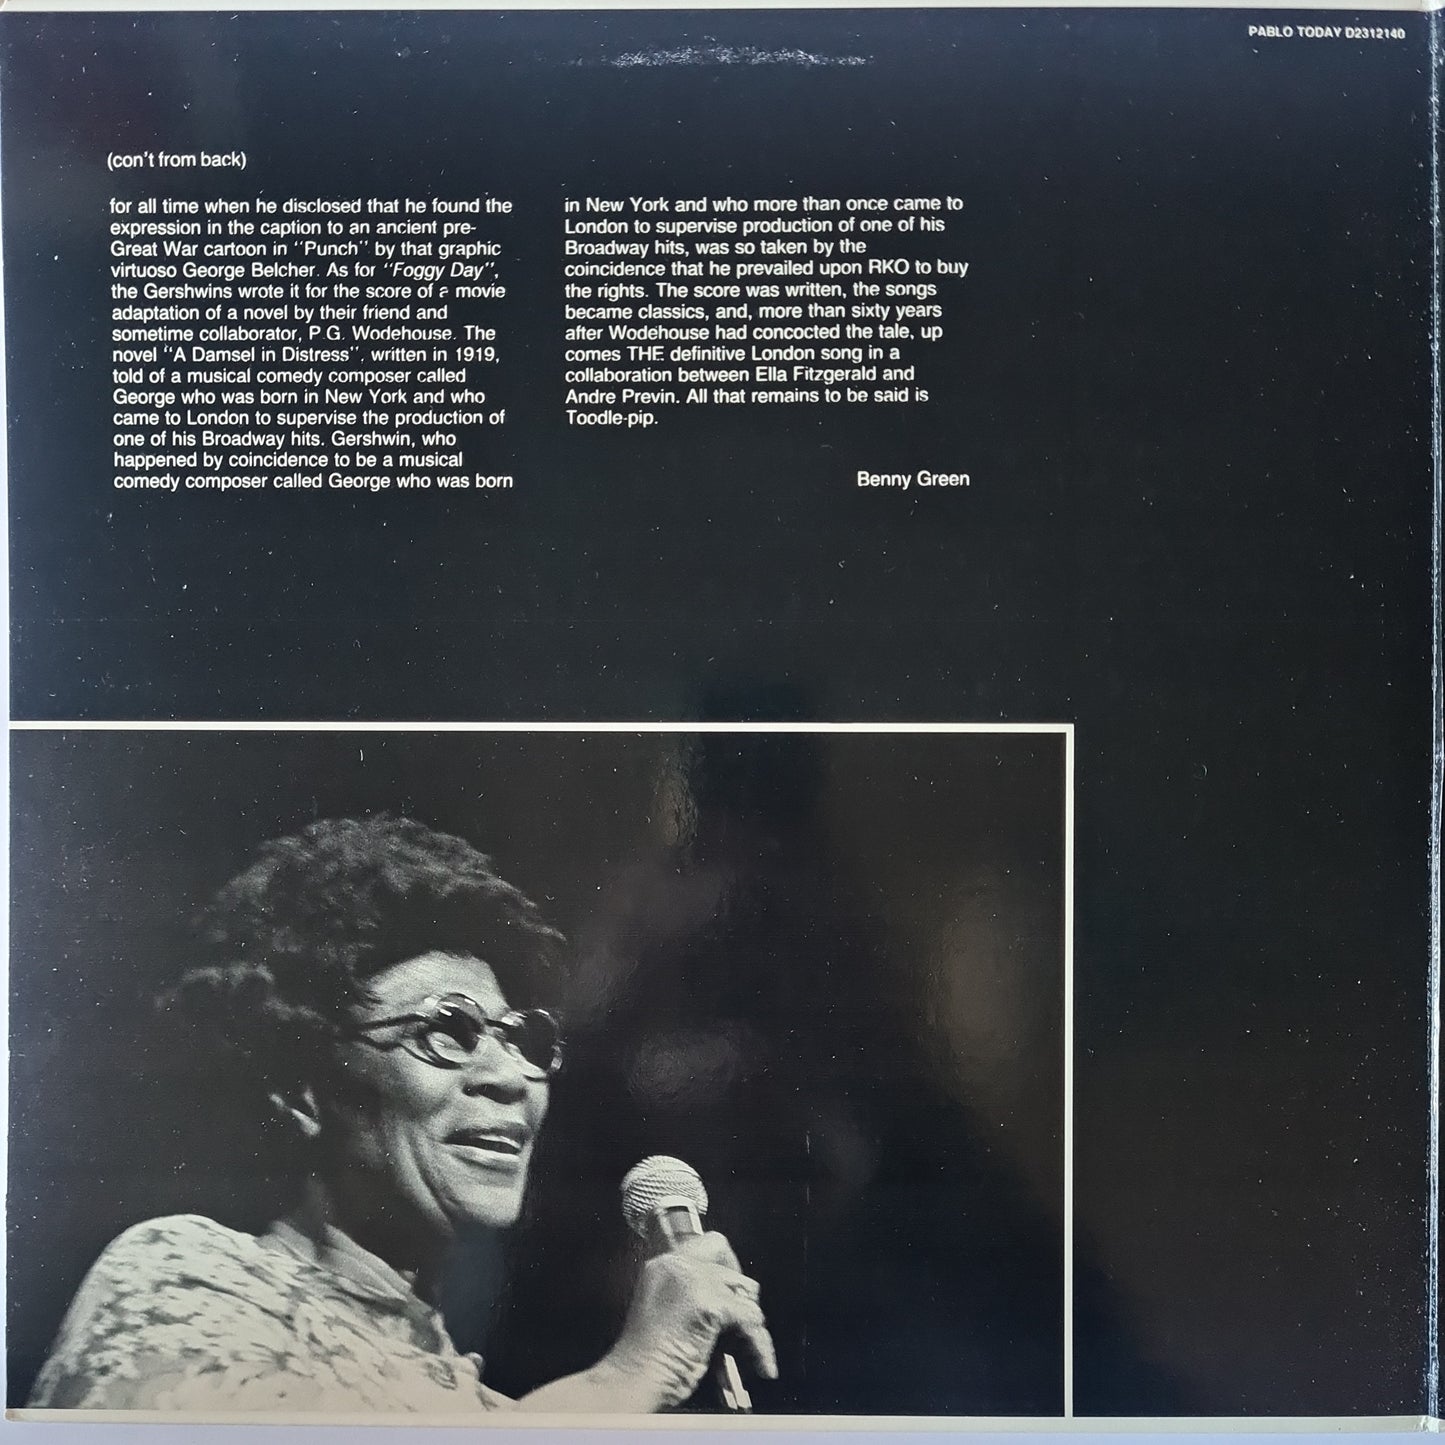 Ella Fitzgerald & Andre Previn – Nice Work If You Can Get It - Ella Fitzgerald And Andre Previn Do Gershwin - 1983 Pressing - Vinyl Record